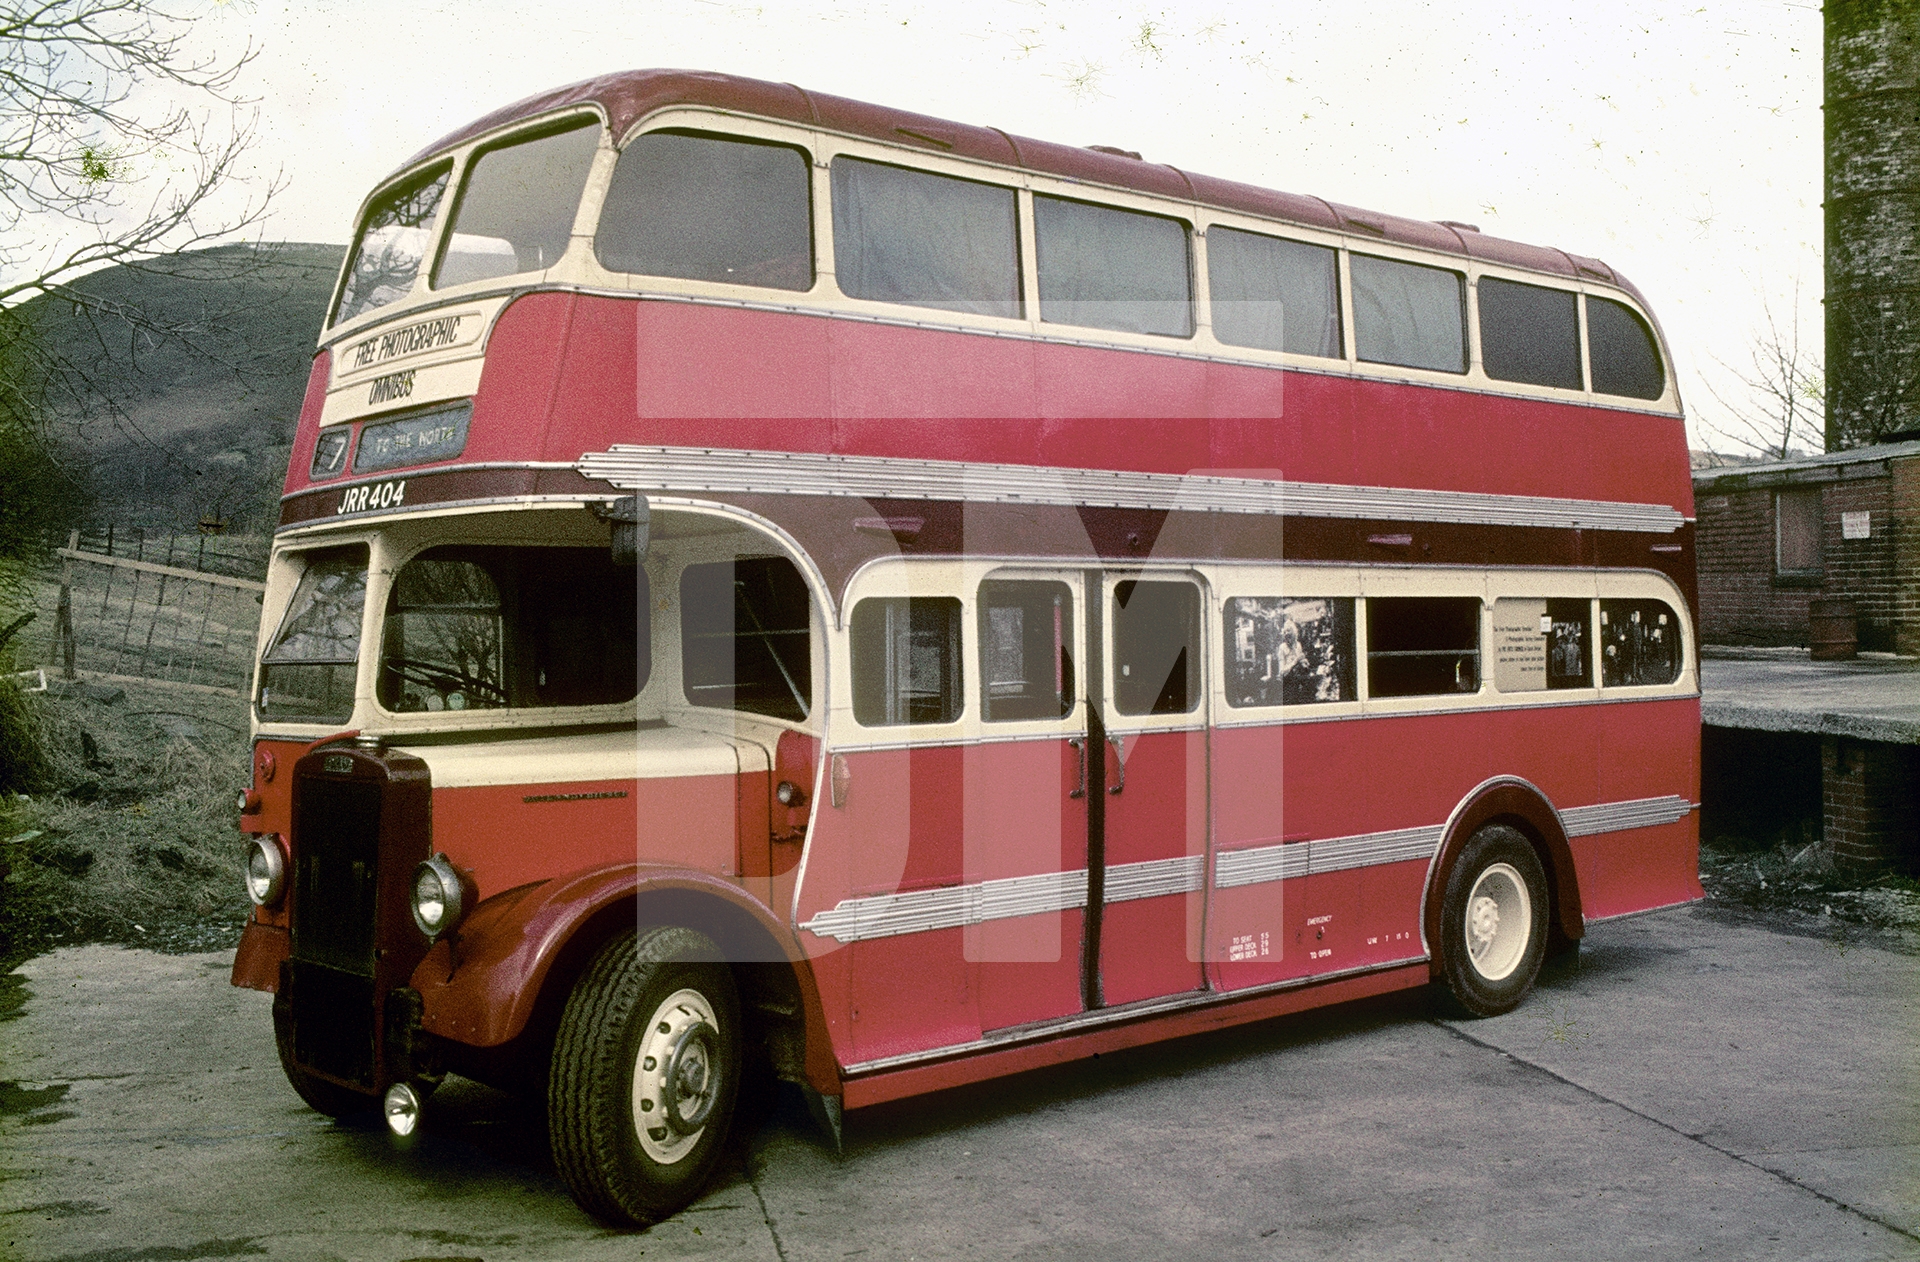 Nearside view of JRR 404, 1948 Leyland Titan PD1 with coachwork by Duple. Commissioned and run by Barton Transport of Chilwell, Nottingham and taken out of service in 1973. Pictured here in 1974 having completed 10,000 miles after being repurposed by Daniel Meadows as his travelling home, gallery and darkroom. by Daniel Meadows